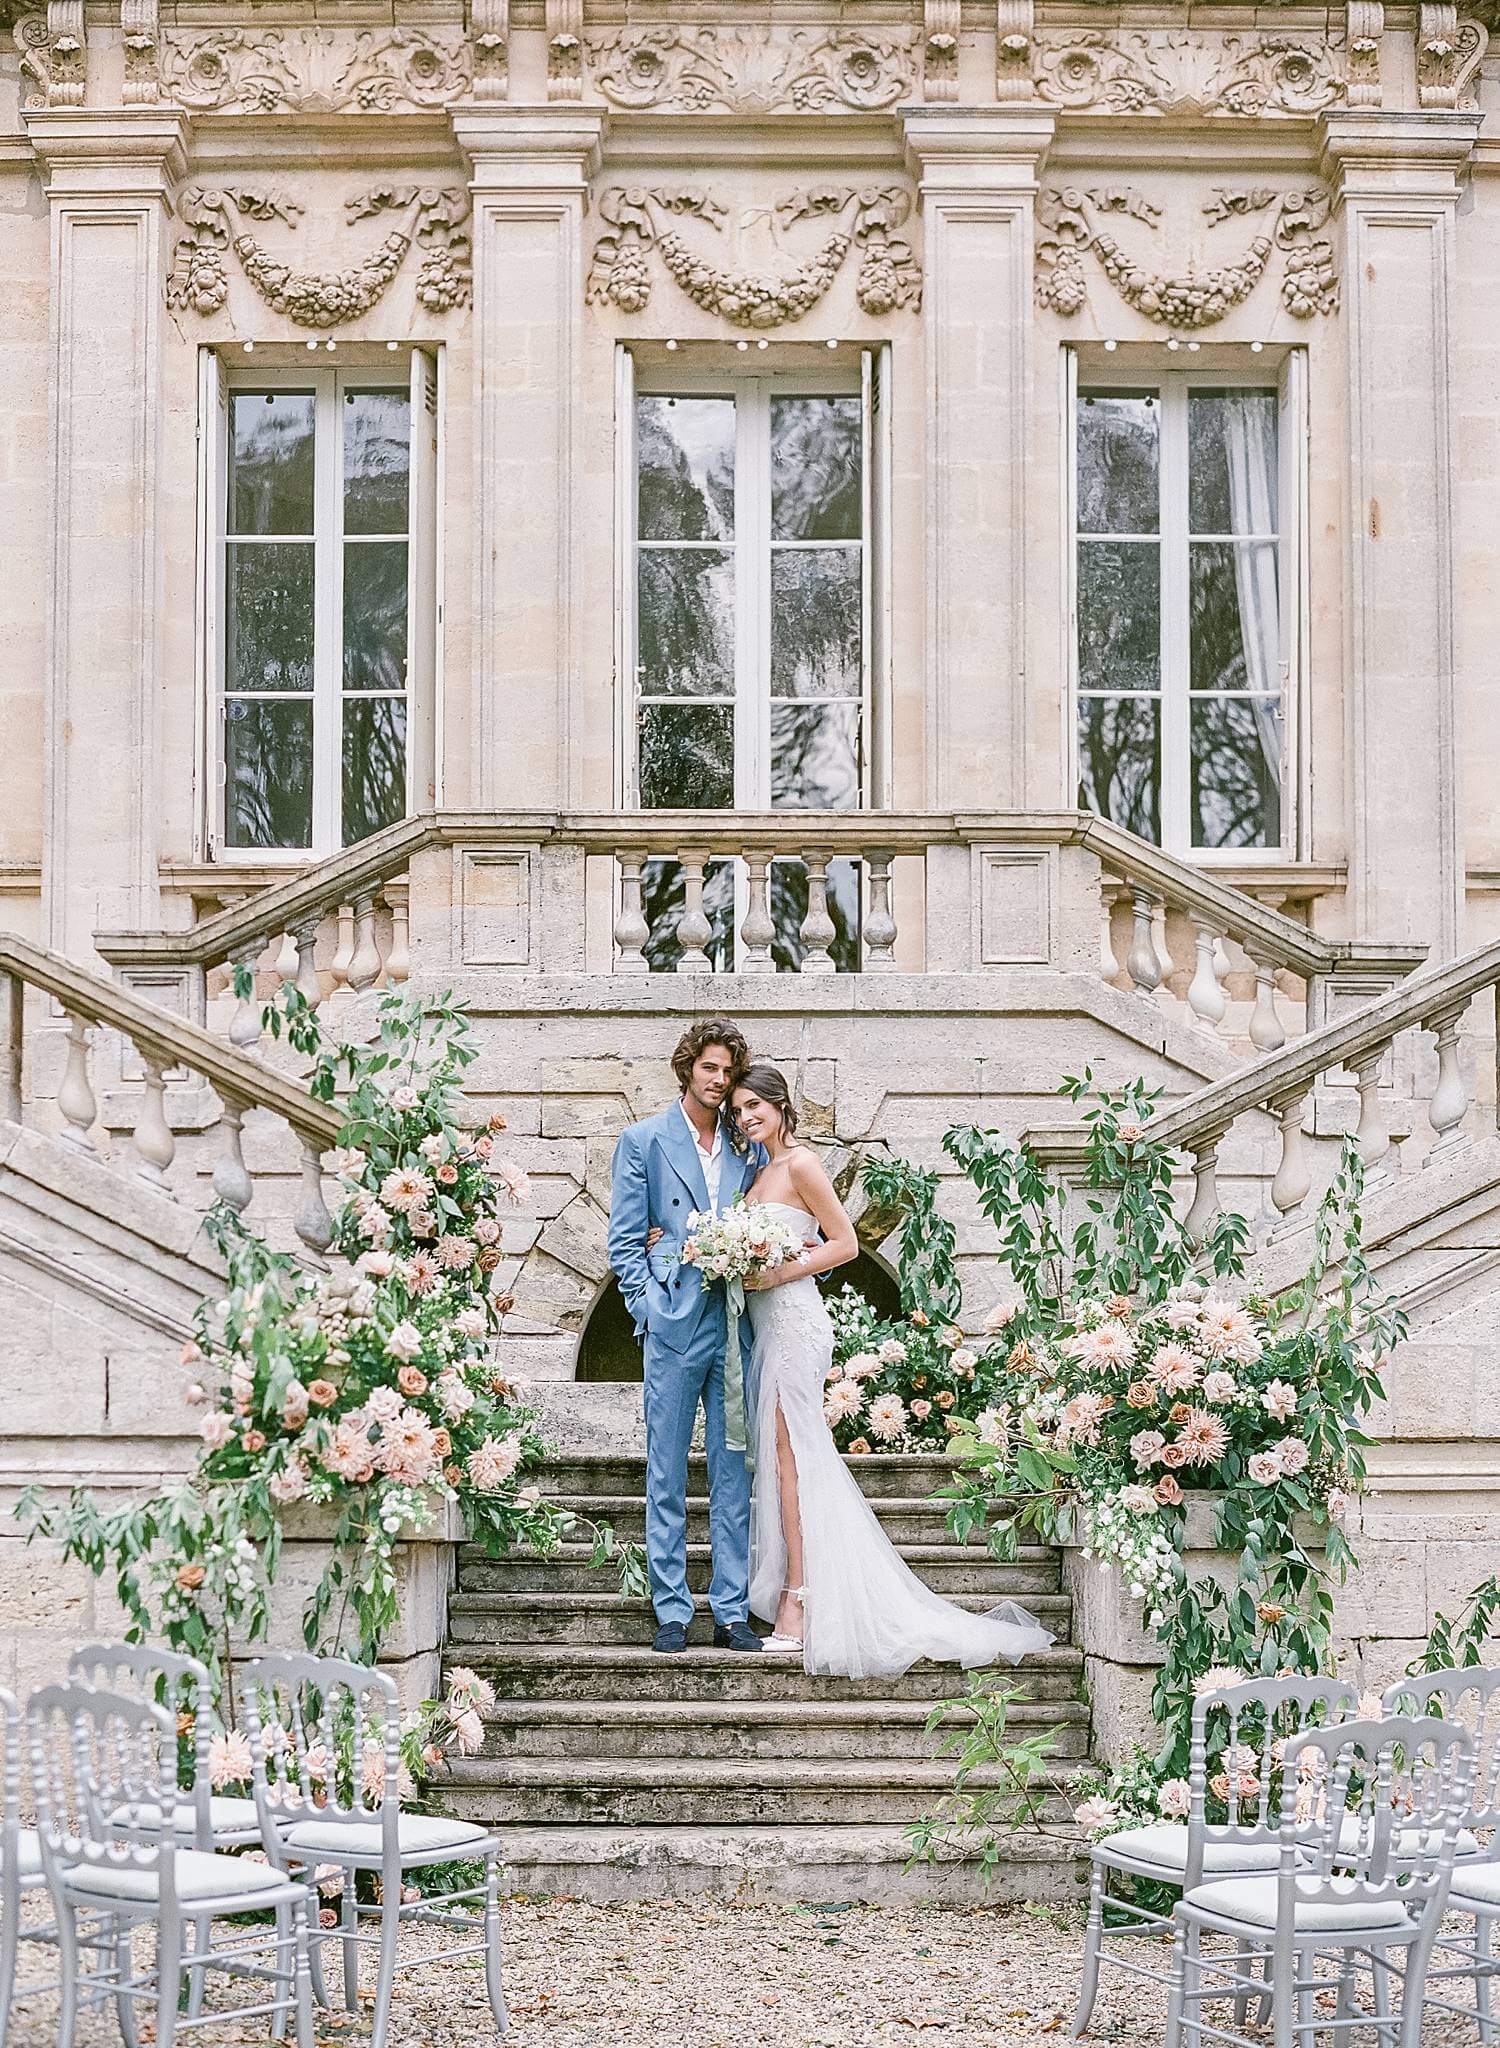 Bride and groom standing at alter for their elopement in Chateau Couffins in Bordeaux France.